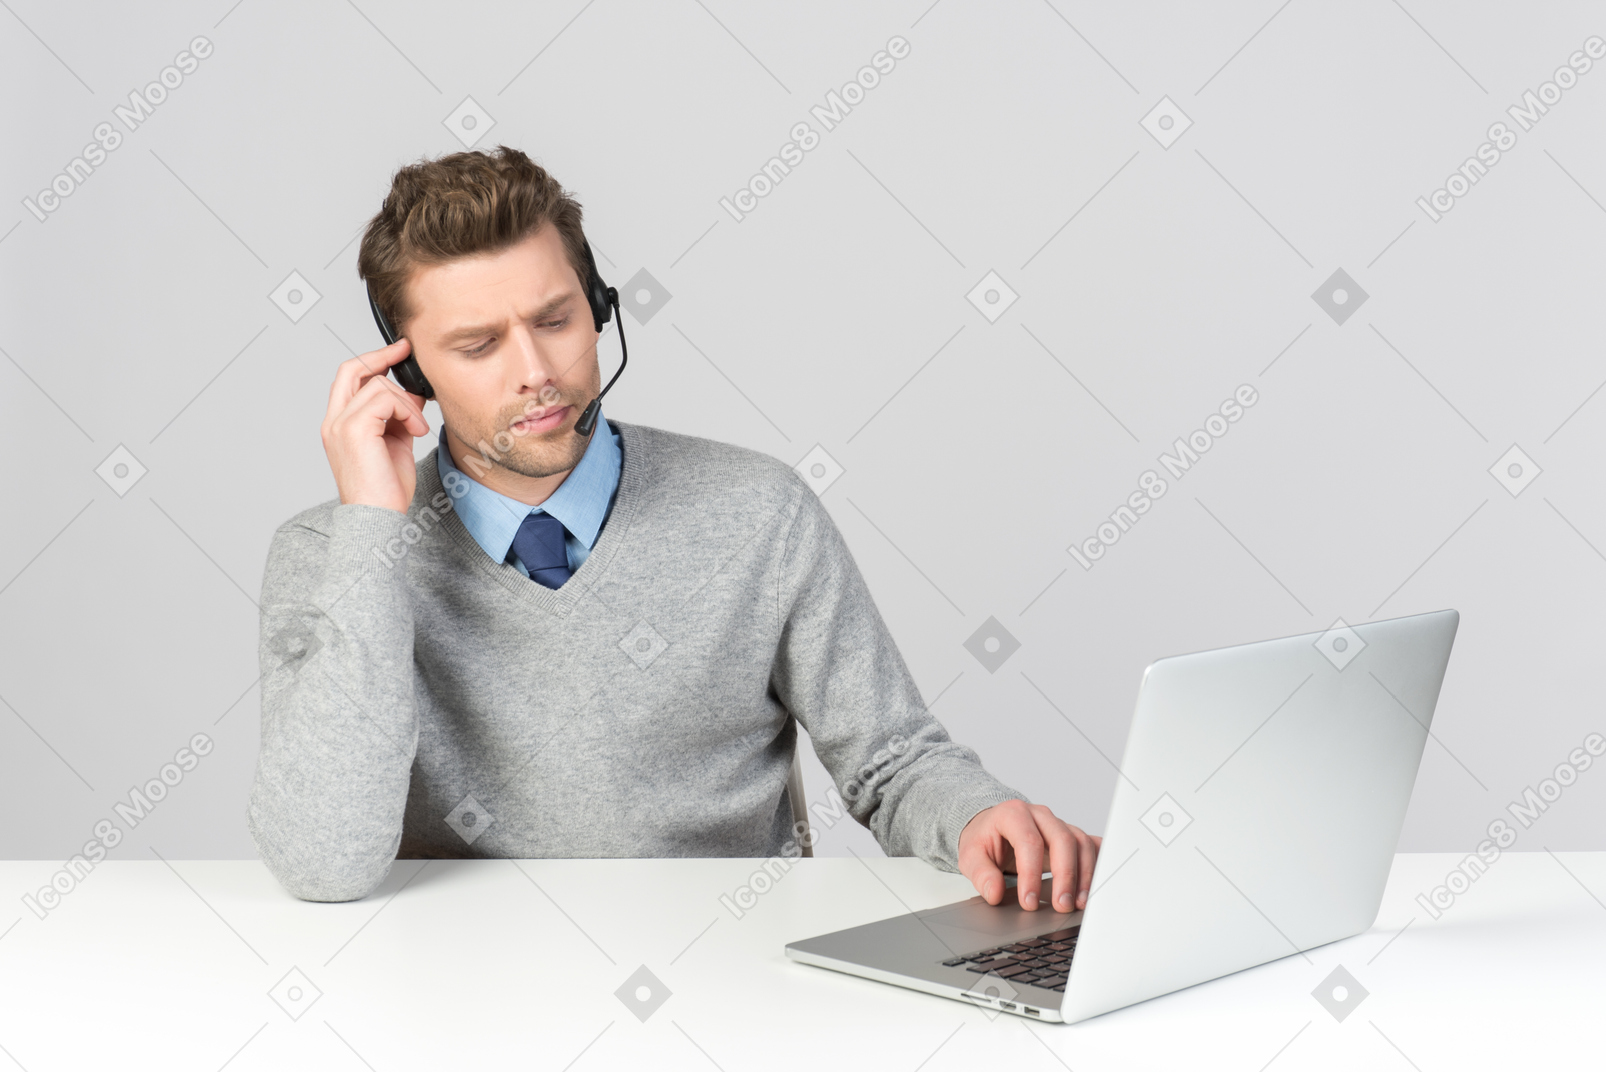 Call center agent working on computer with his eyes closed